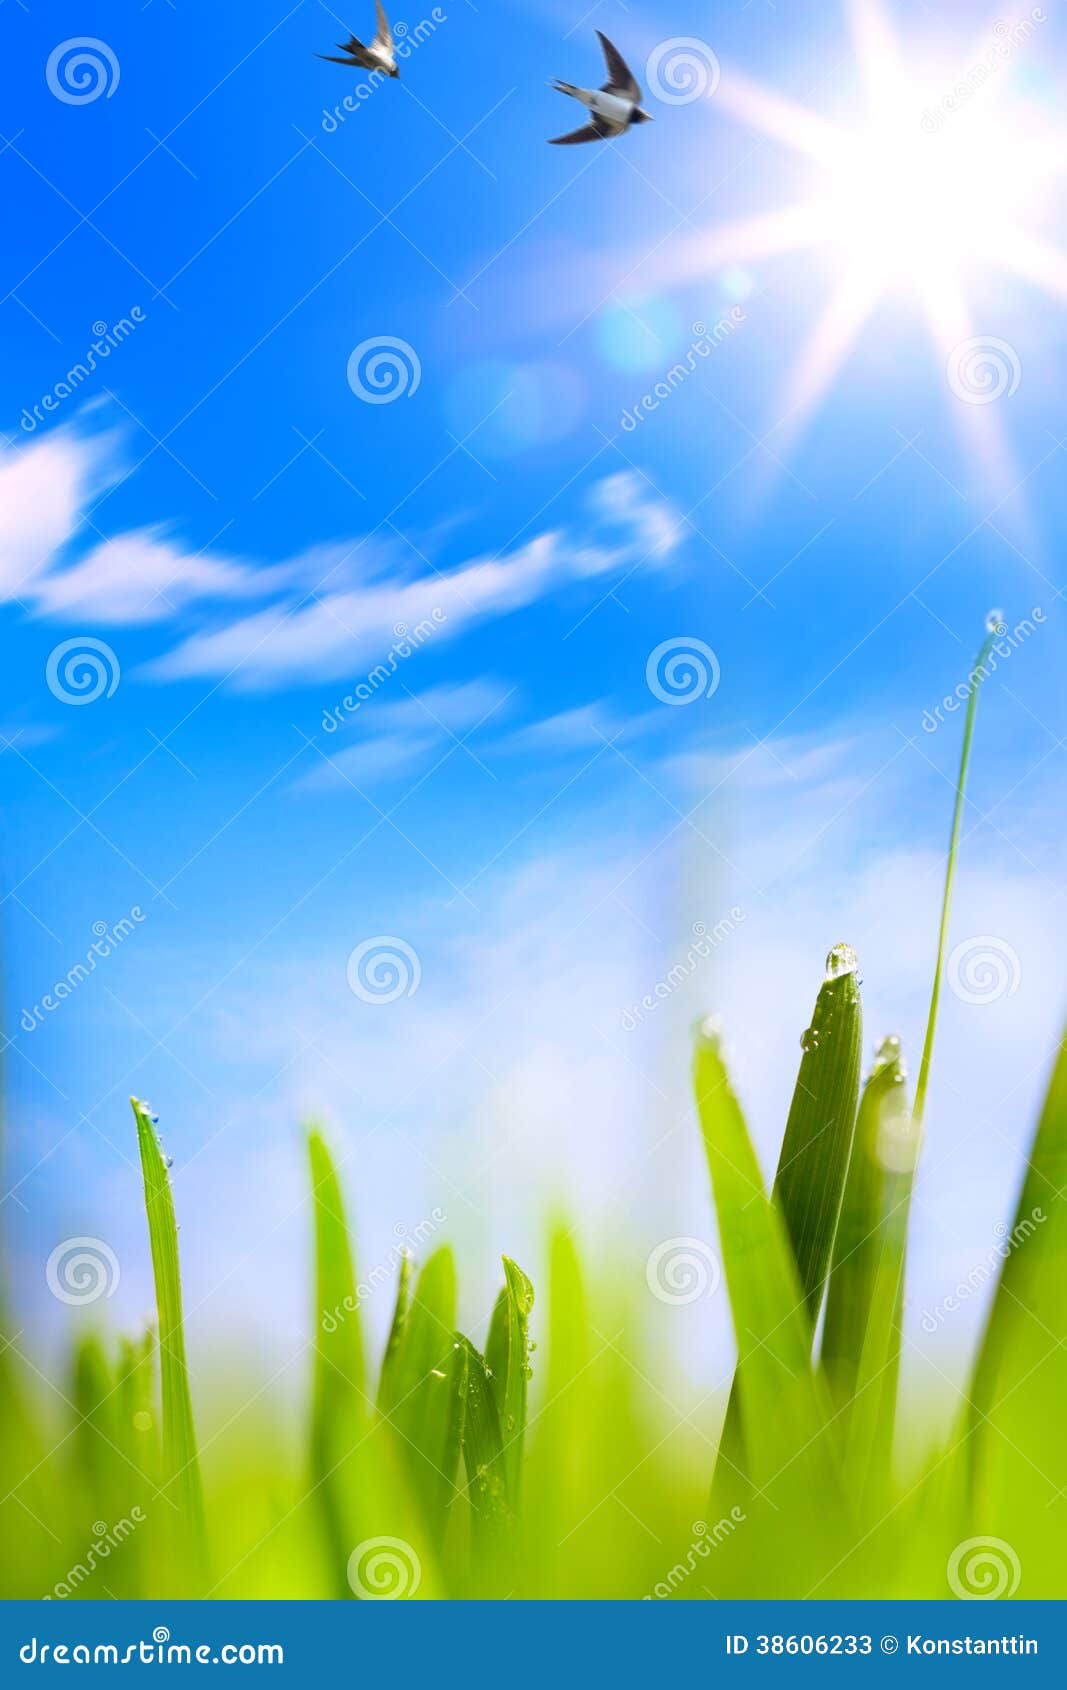 abstracts beautifu spring background